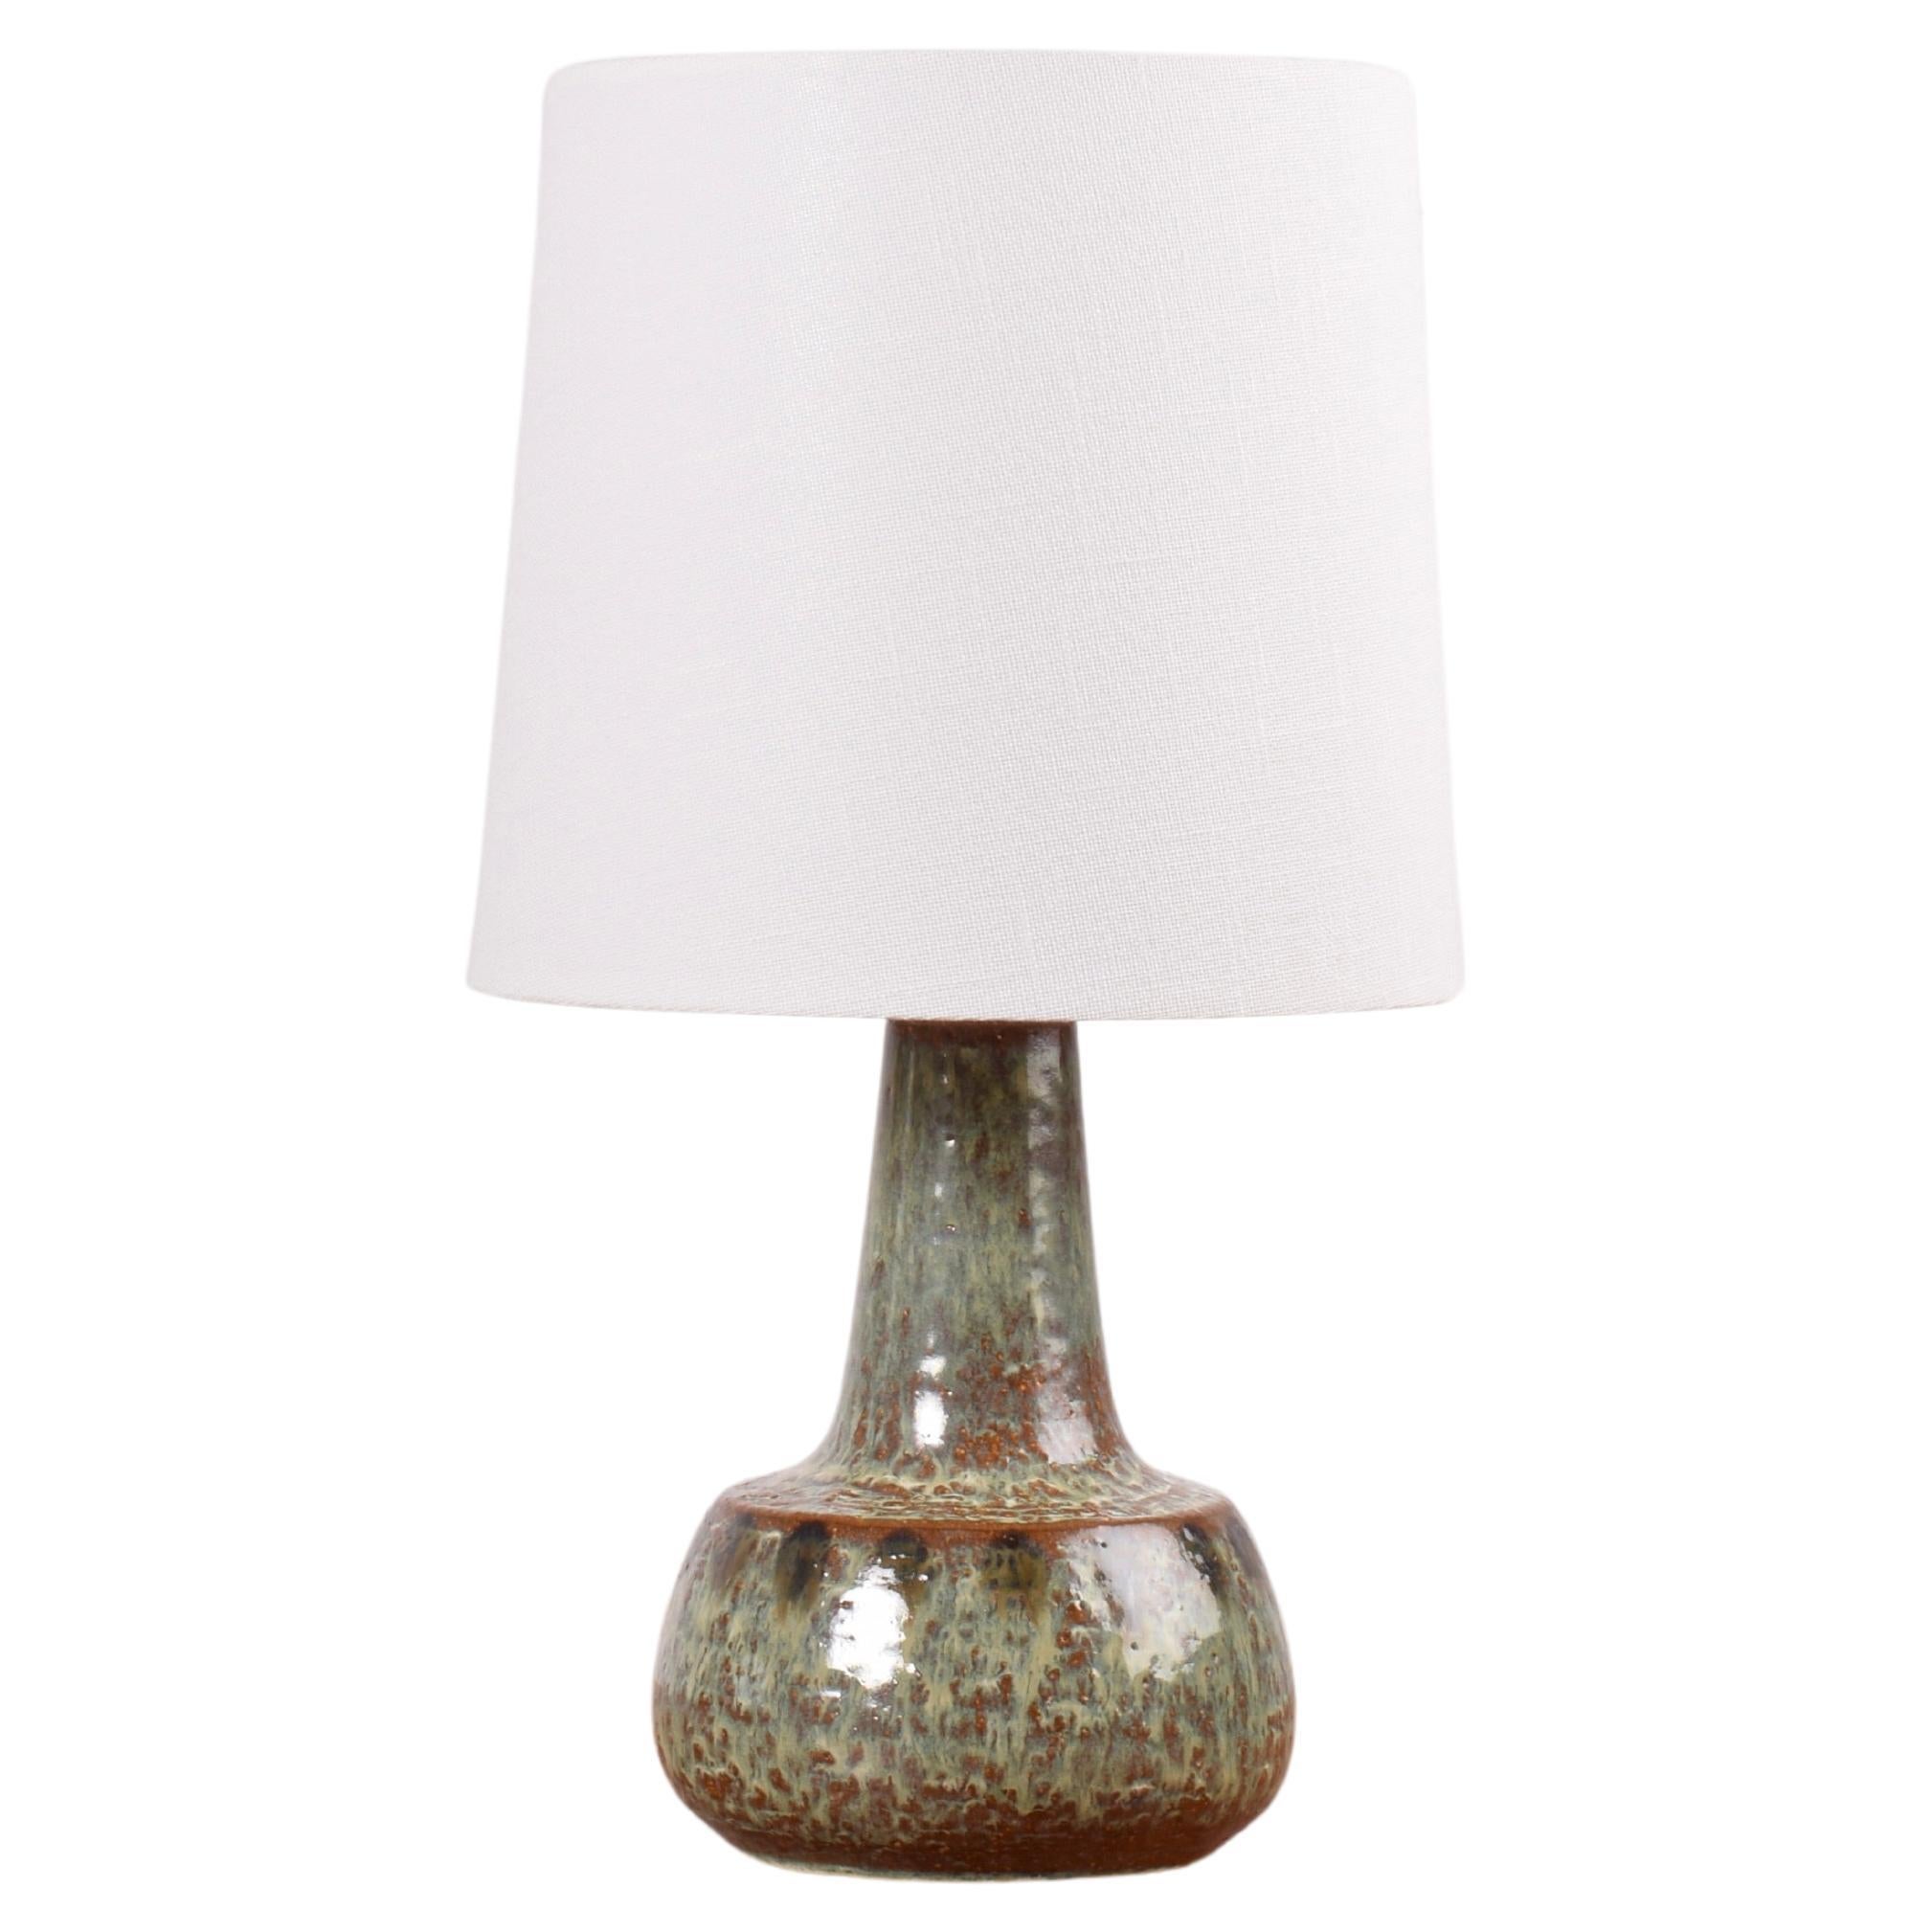 Søholm Small Ceramic Table Lamp with Brown and Green Glaze, Danish Modern 1960s